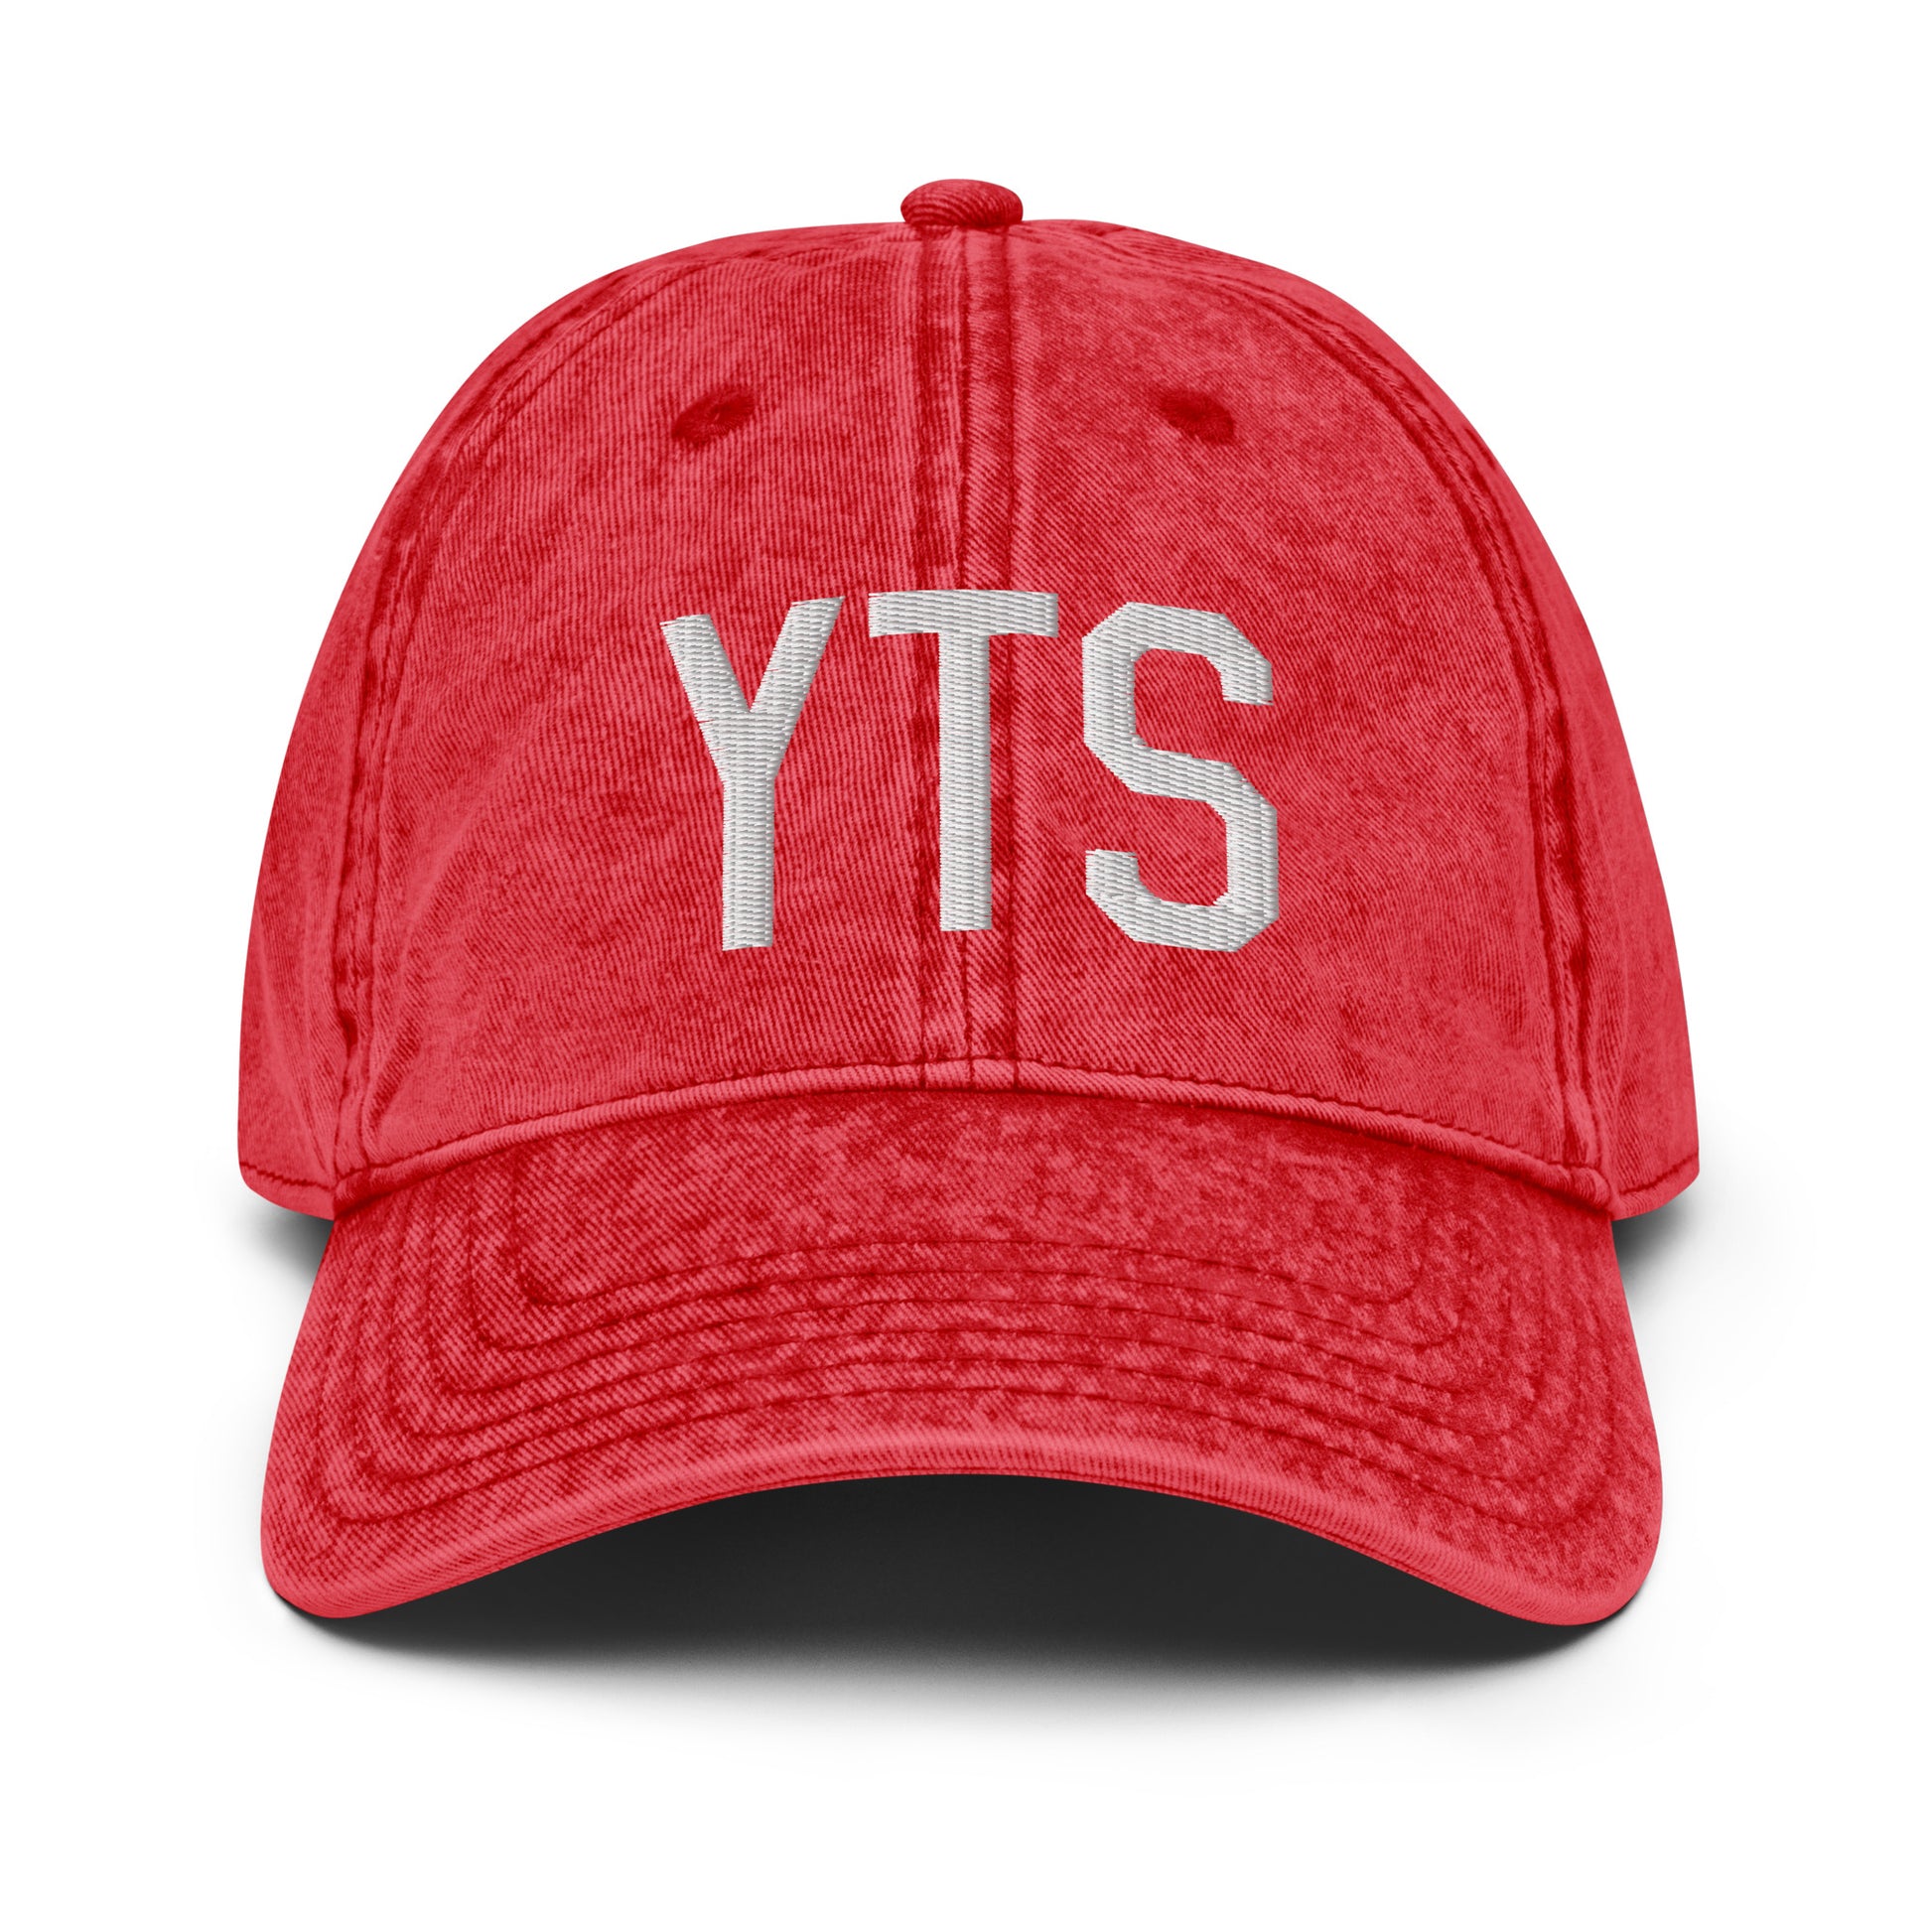 Airport Code Twill Cap - White • YTS Timmins • YHM Designs - Image 22